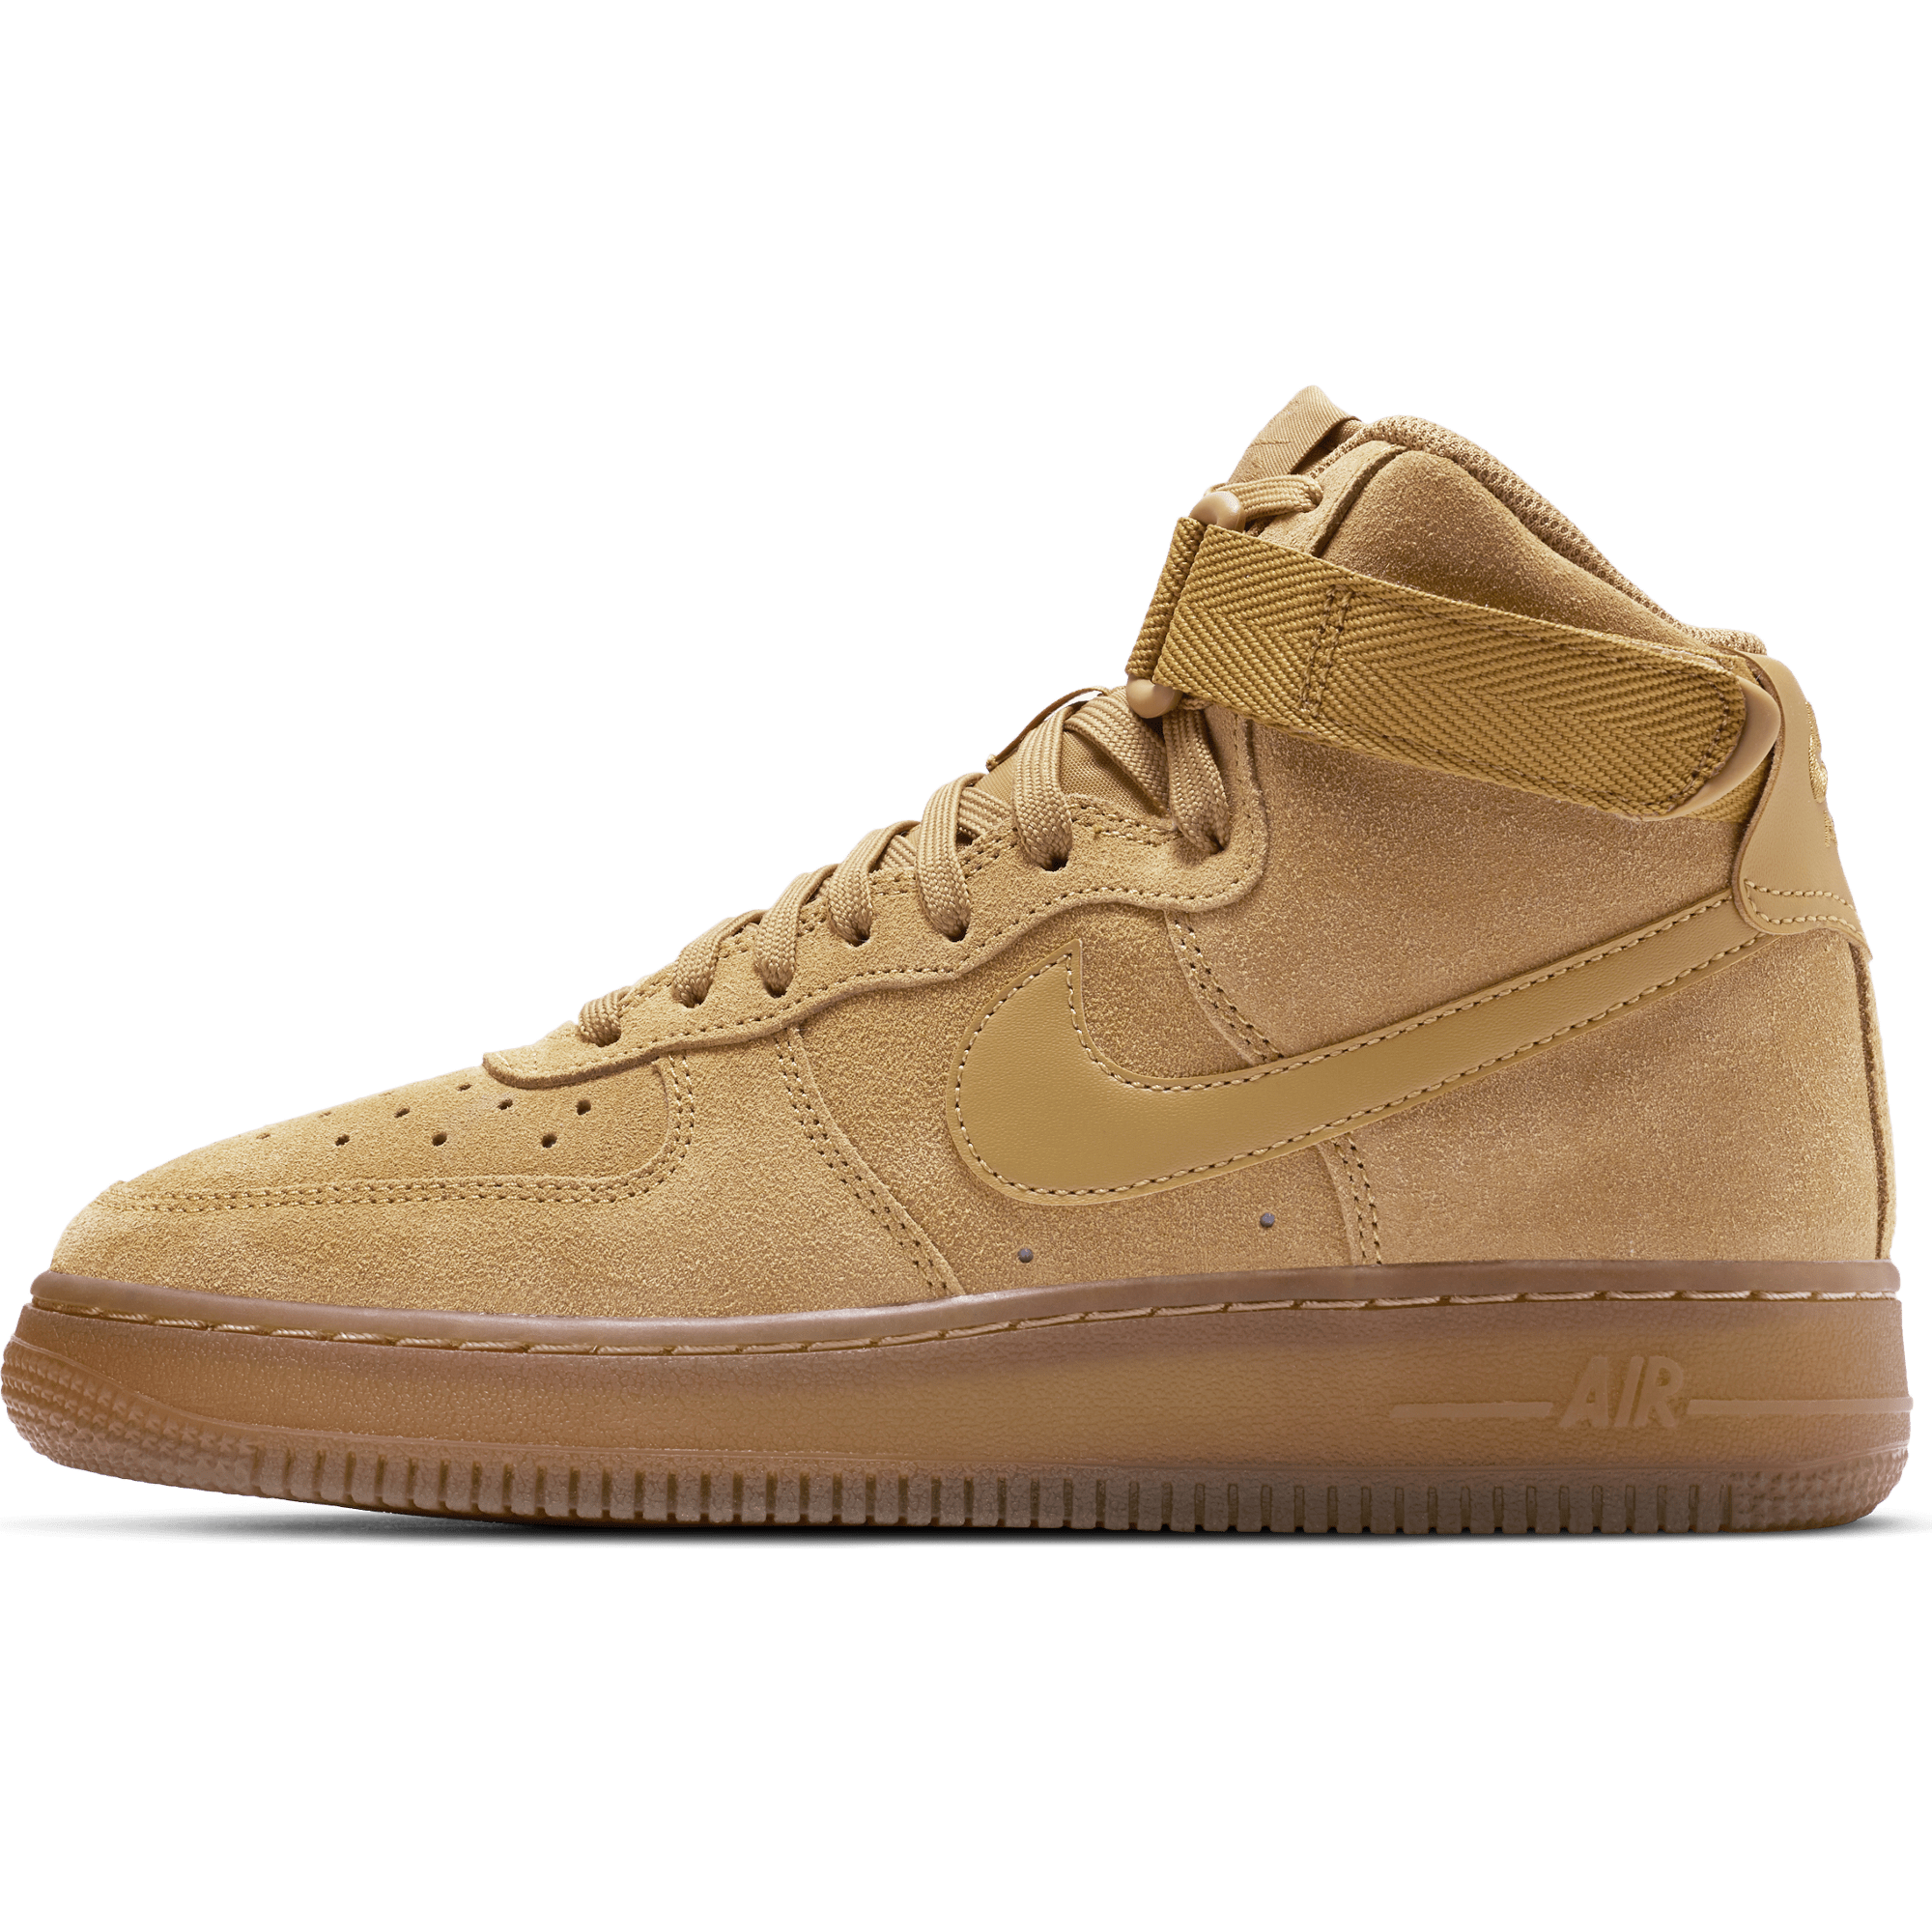  Nike Toddler's Force 1 LV8 3 Wheat/Wheat-Gum Light Brown  (BQ5487 700) | Sneakers